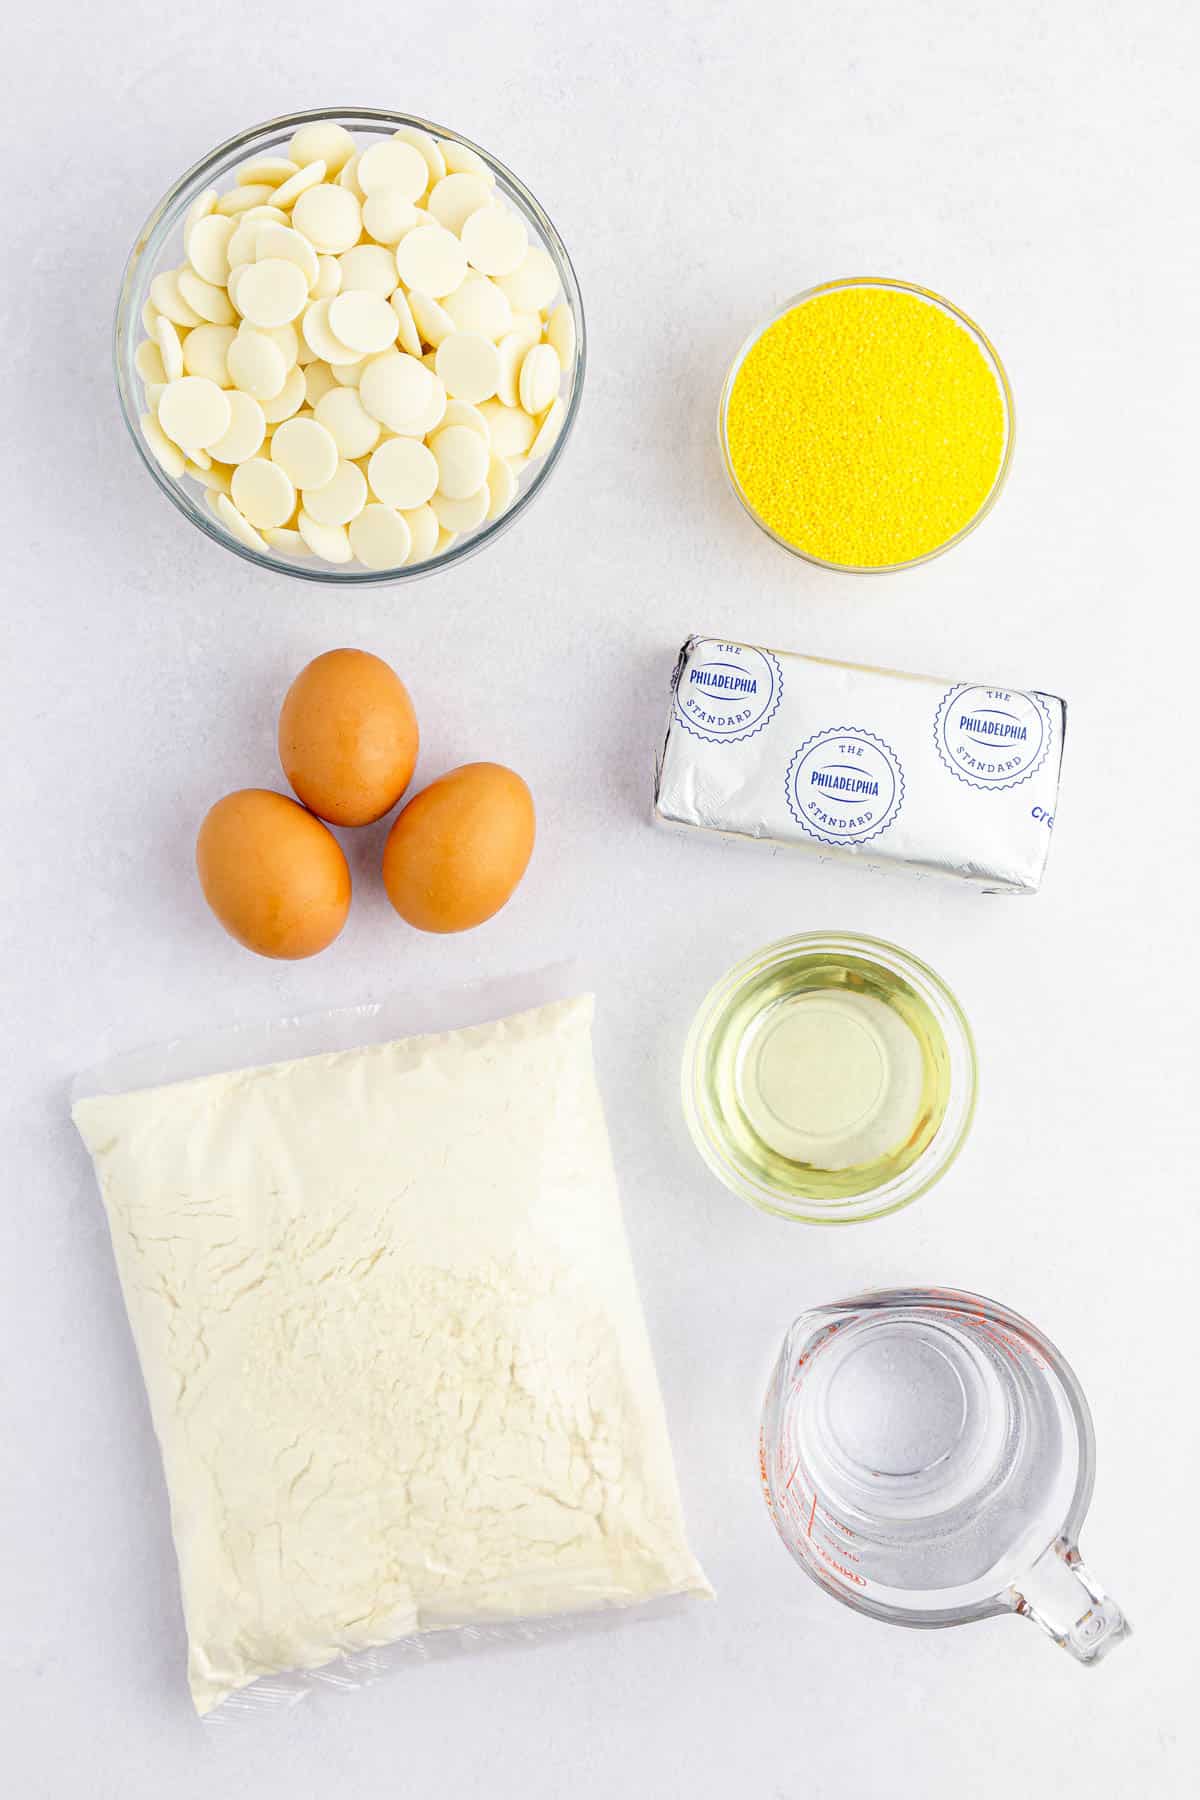 white candy melts, yellow sprinkles, cream cheese, oil, water, 3 eggs, cake mix on counter